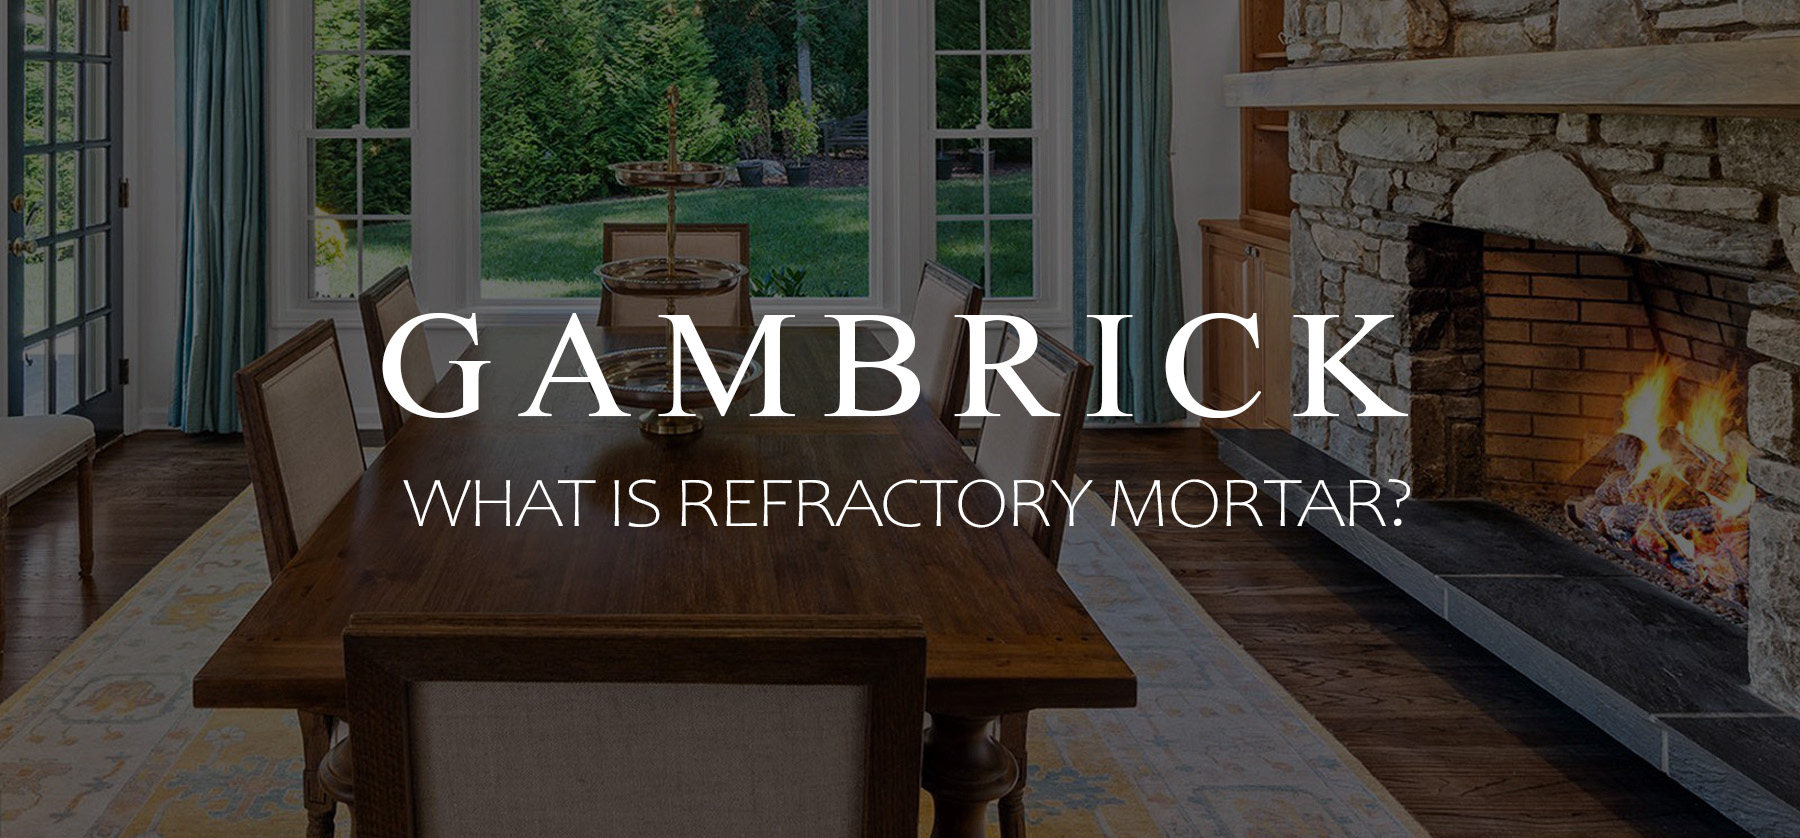 what is refractory mortar banner